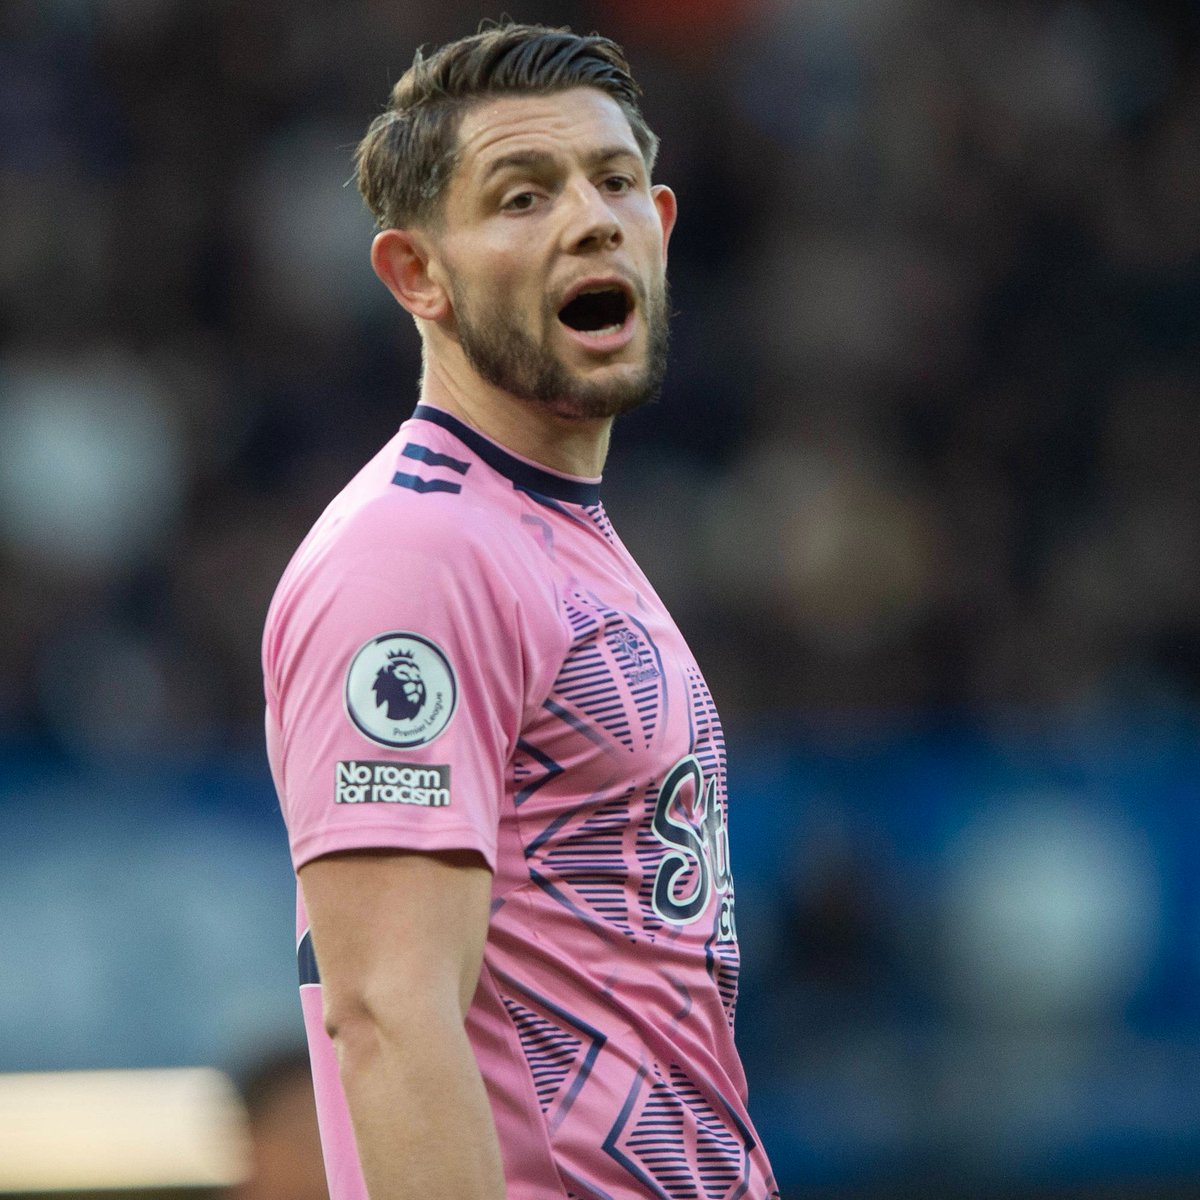 ⚠️ | QUICK STAT James Tarkowski blocked 7 opposition shots against Chelsea, which is the most blocked shots by one player in a single match in the top 5 European leagues this season. A brave display as he helped Everton snatch a point from Stamford Bridge. 💪 #CHEEVE